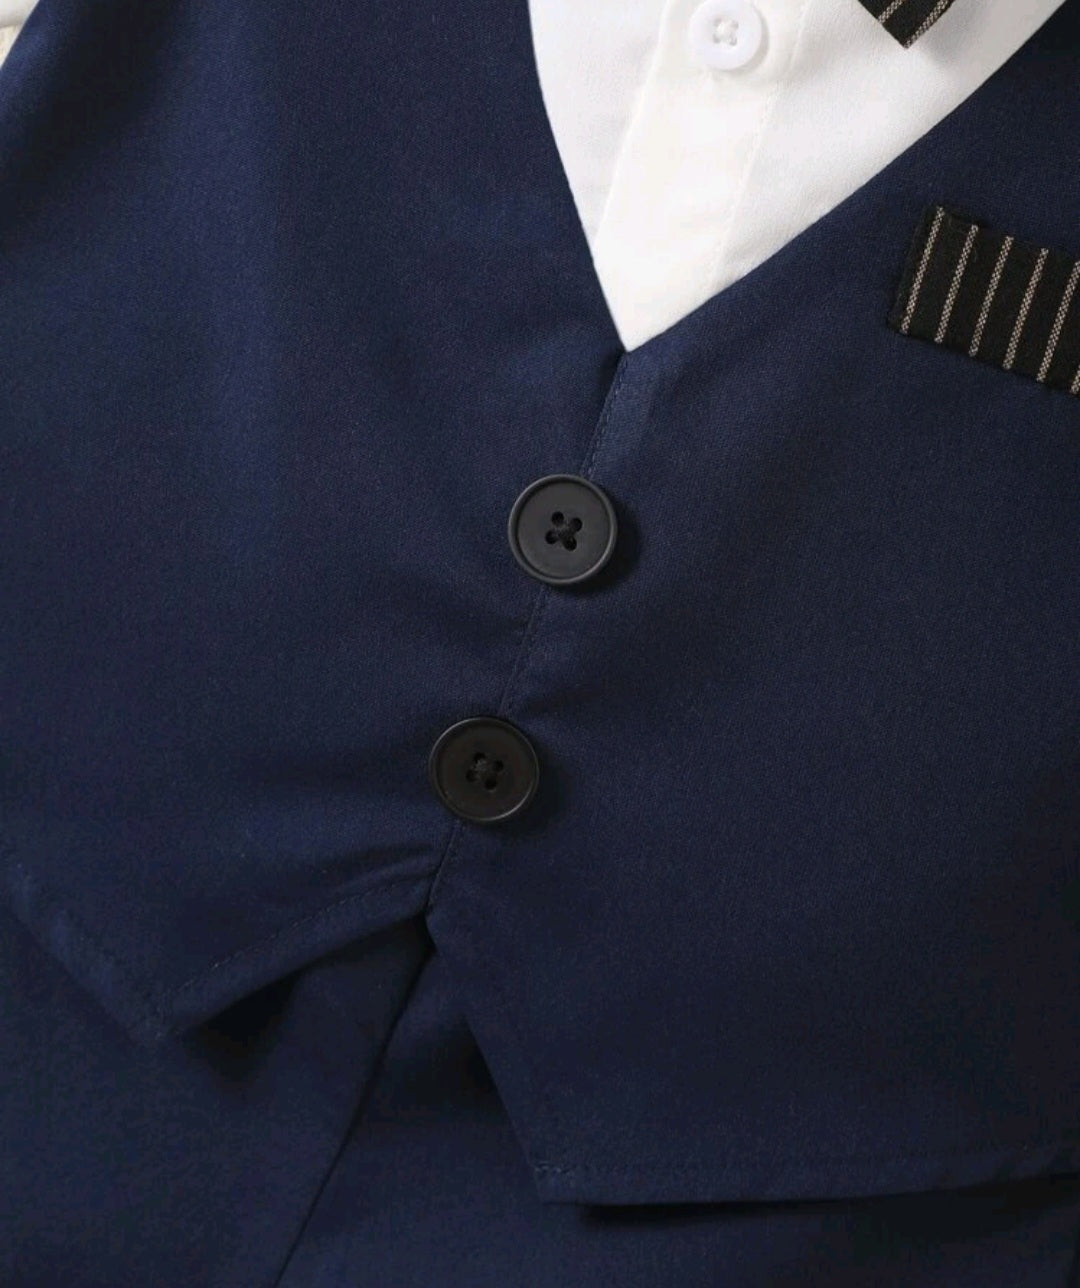 Gentleman Suit Navy and White 